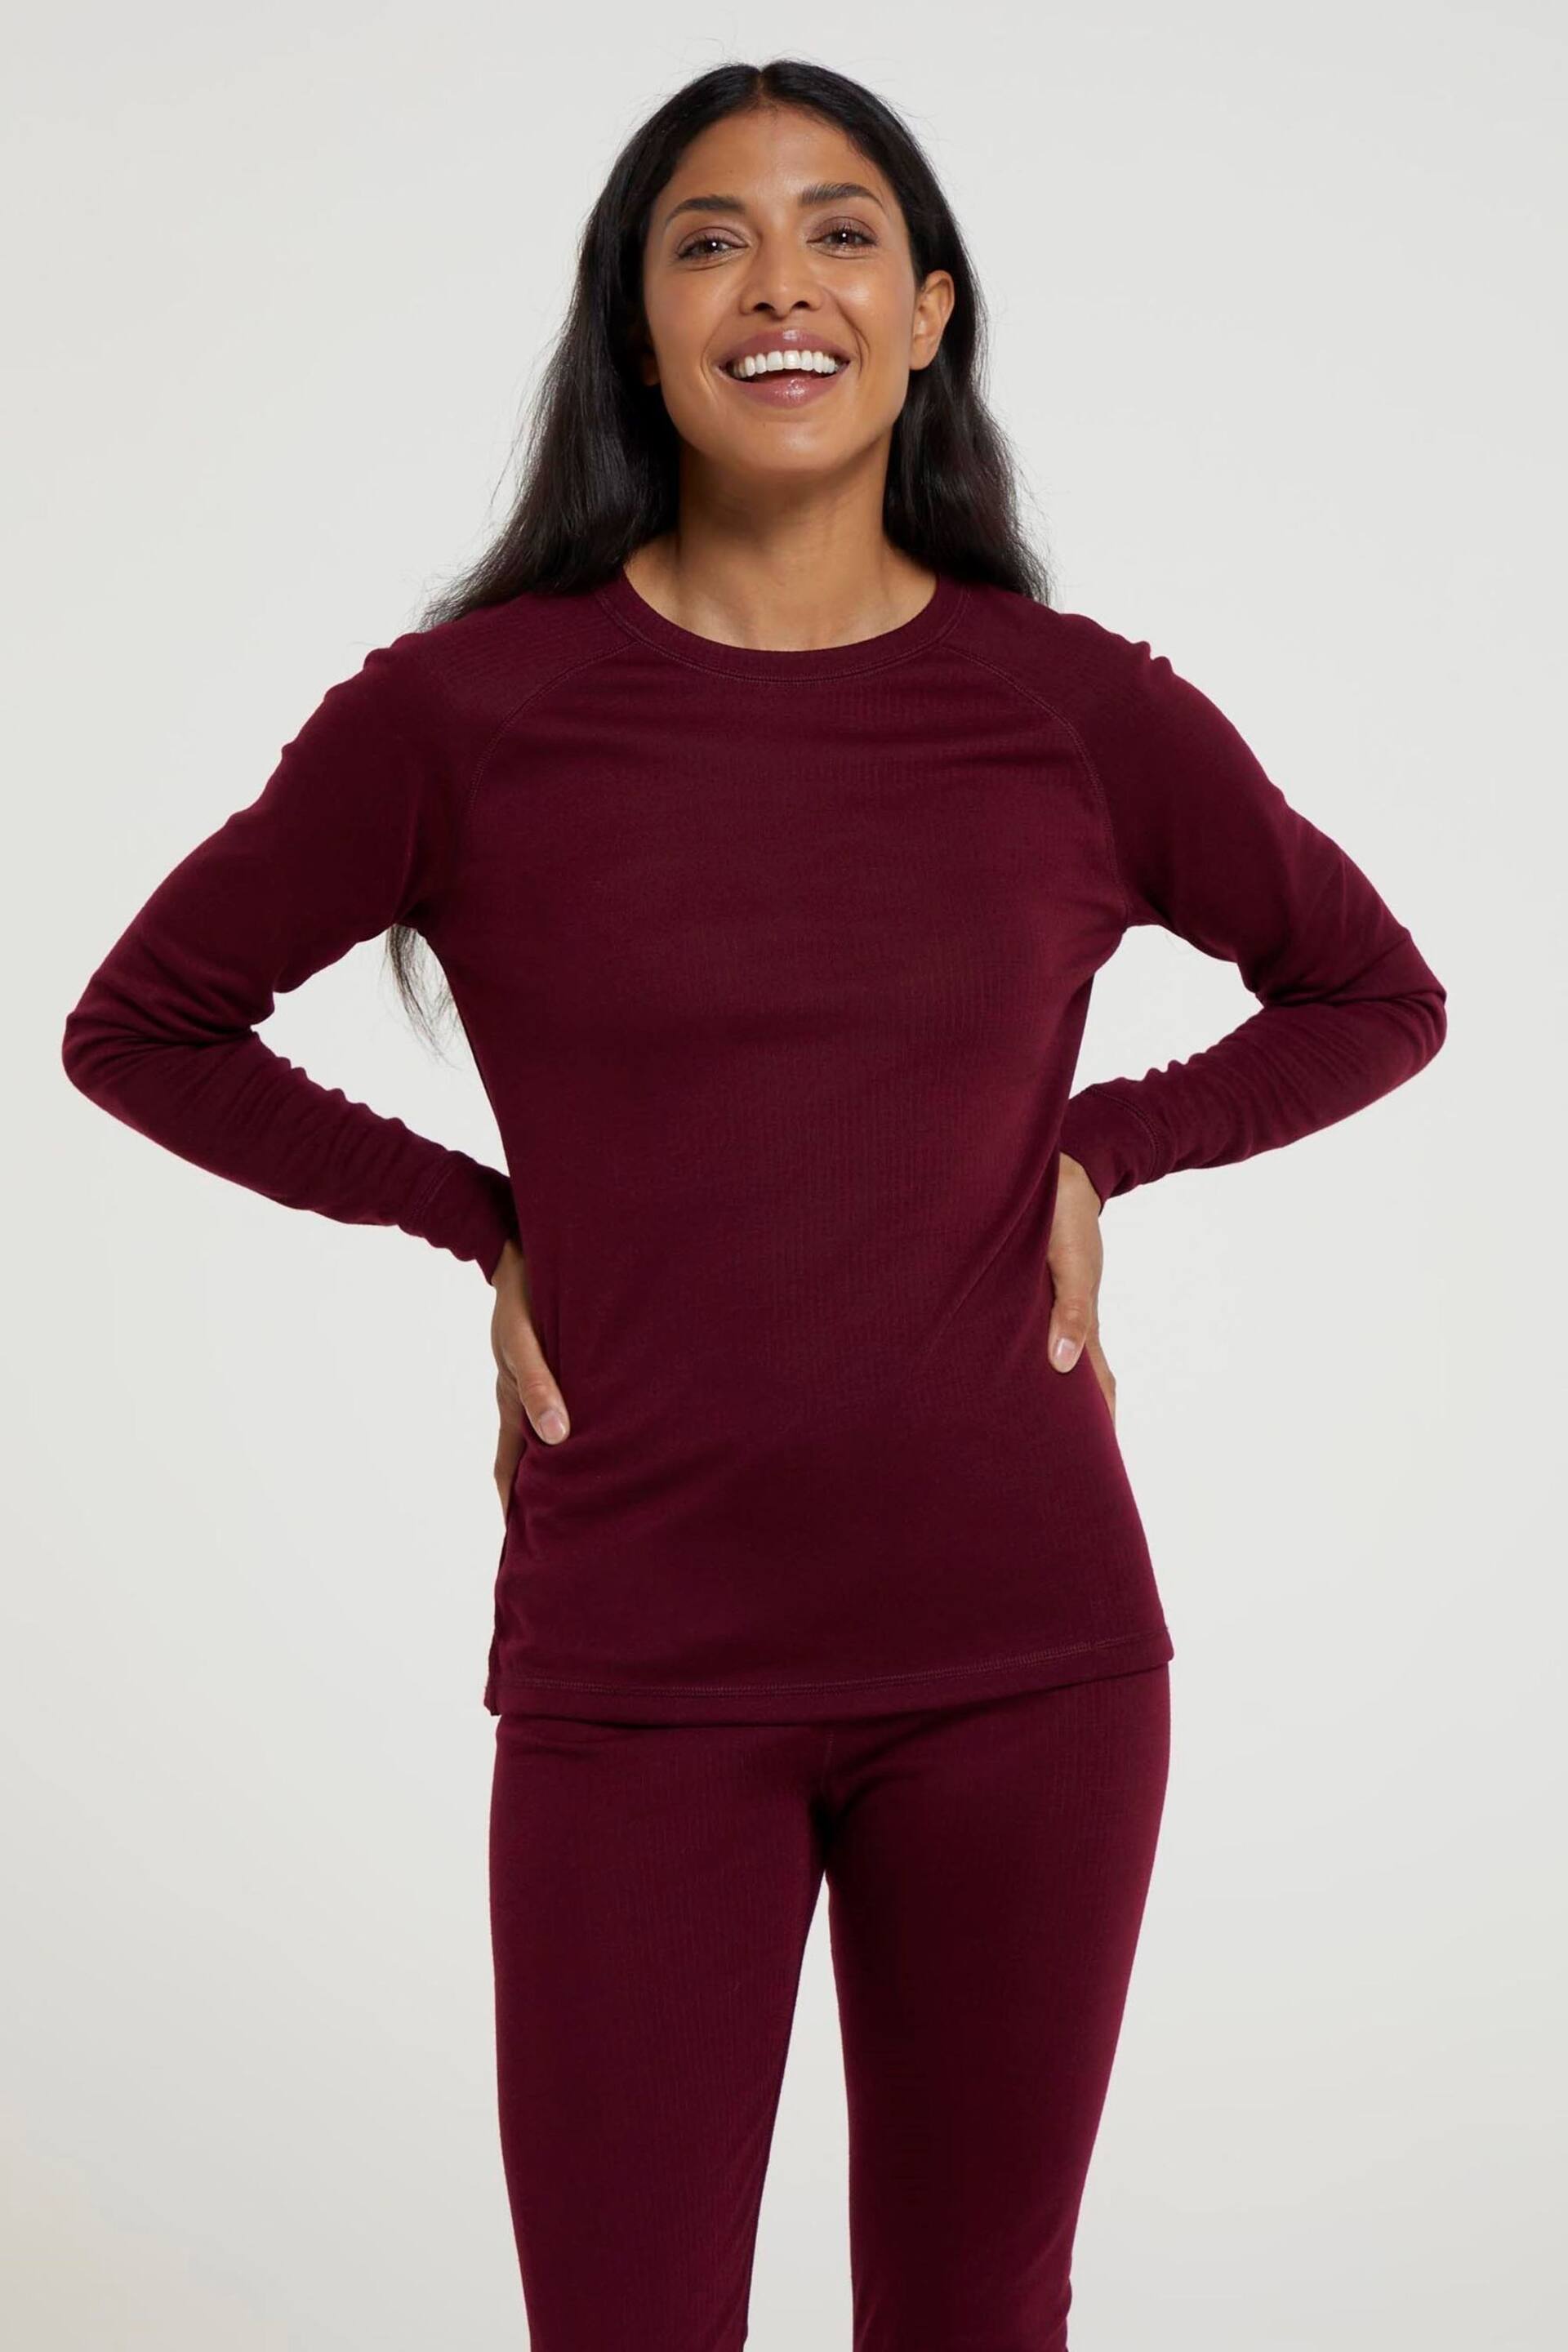 Mountain Warehouse Pink Womens Talus Round Neck Thermal Top - Image 1 of 7